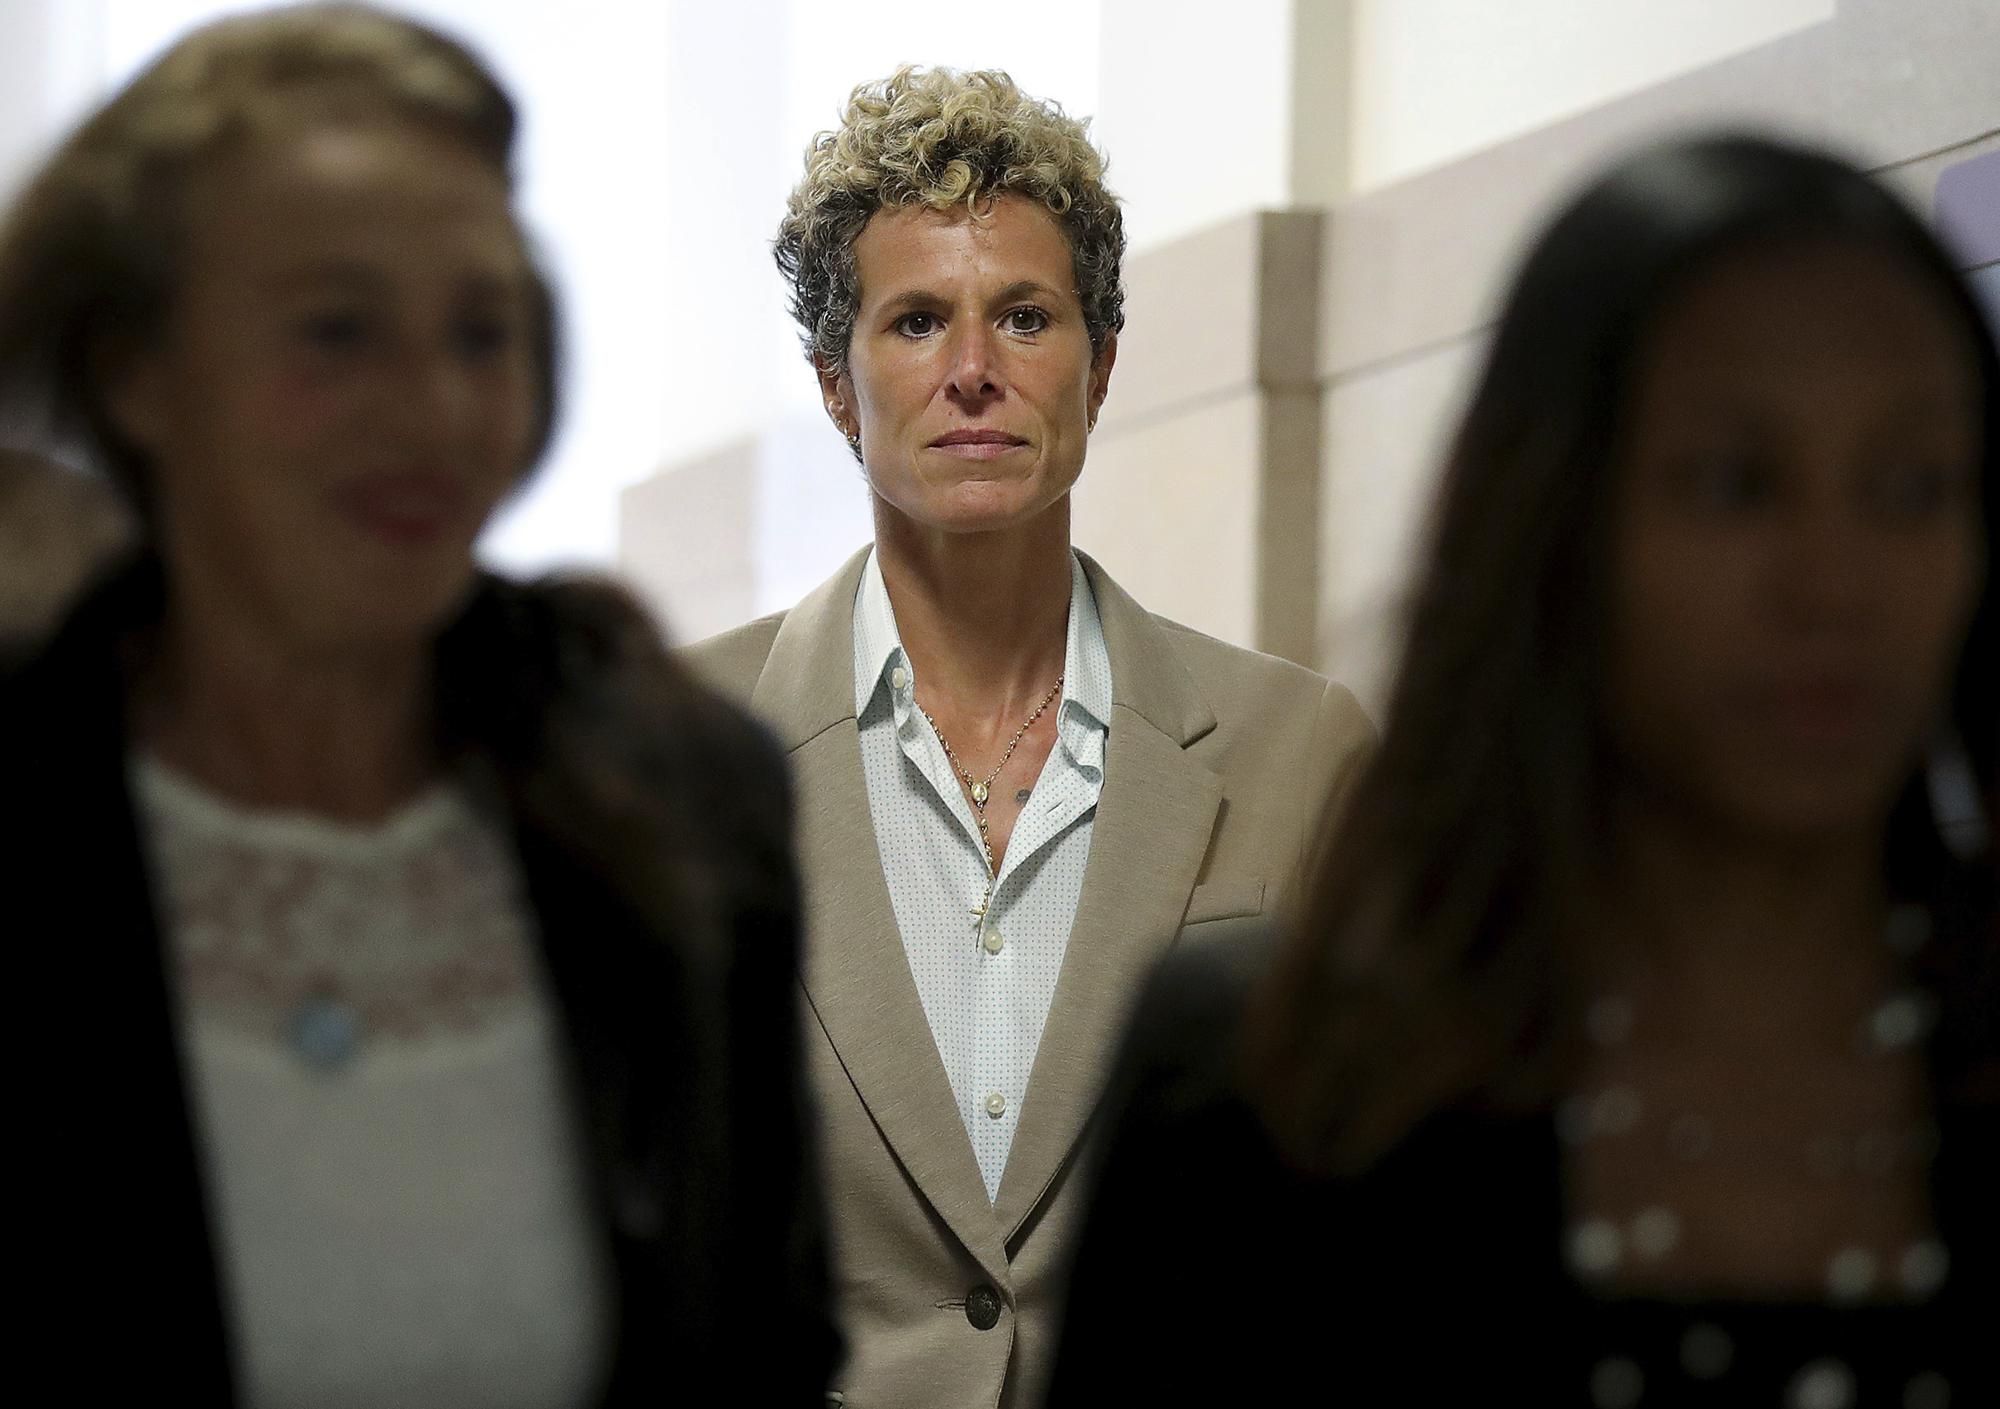 FILE - Andrea Constand returns to the courtroom during a lunch break at the sentencing hearing for Bill Cosby at the Montgomery County Courthouse in Norristown, Pa., on Sept. 24, 2018. The jury – deliberating as the #MeToo movement took hold – convicted the aging TV star of drugging and sexually assaulting her in 2005. The judge sent him to prison. Then a Pennsylvania appeals court found the prosecution case flawed and freed Cosby last year.  (David Maialetti/The Philadelphia Inquirer via AP, Pool, File)